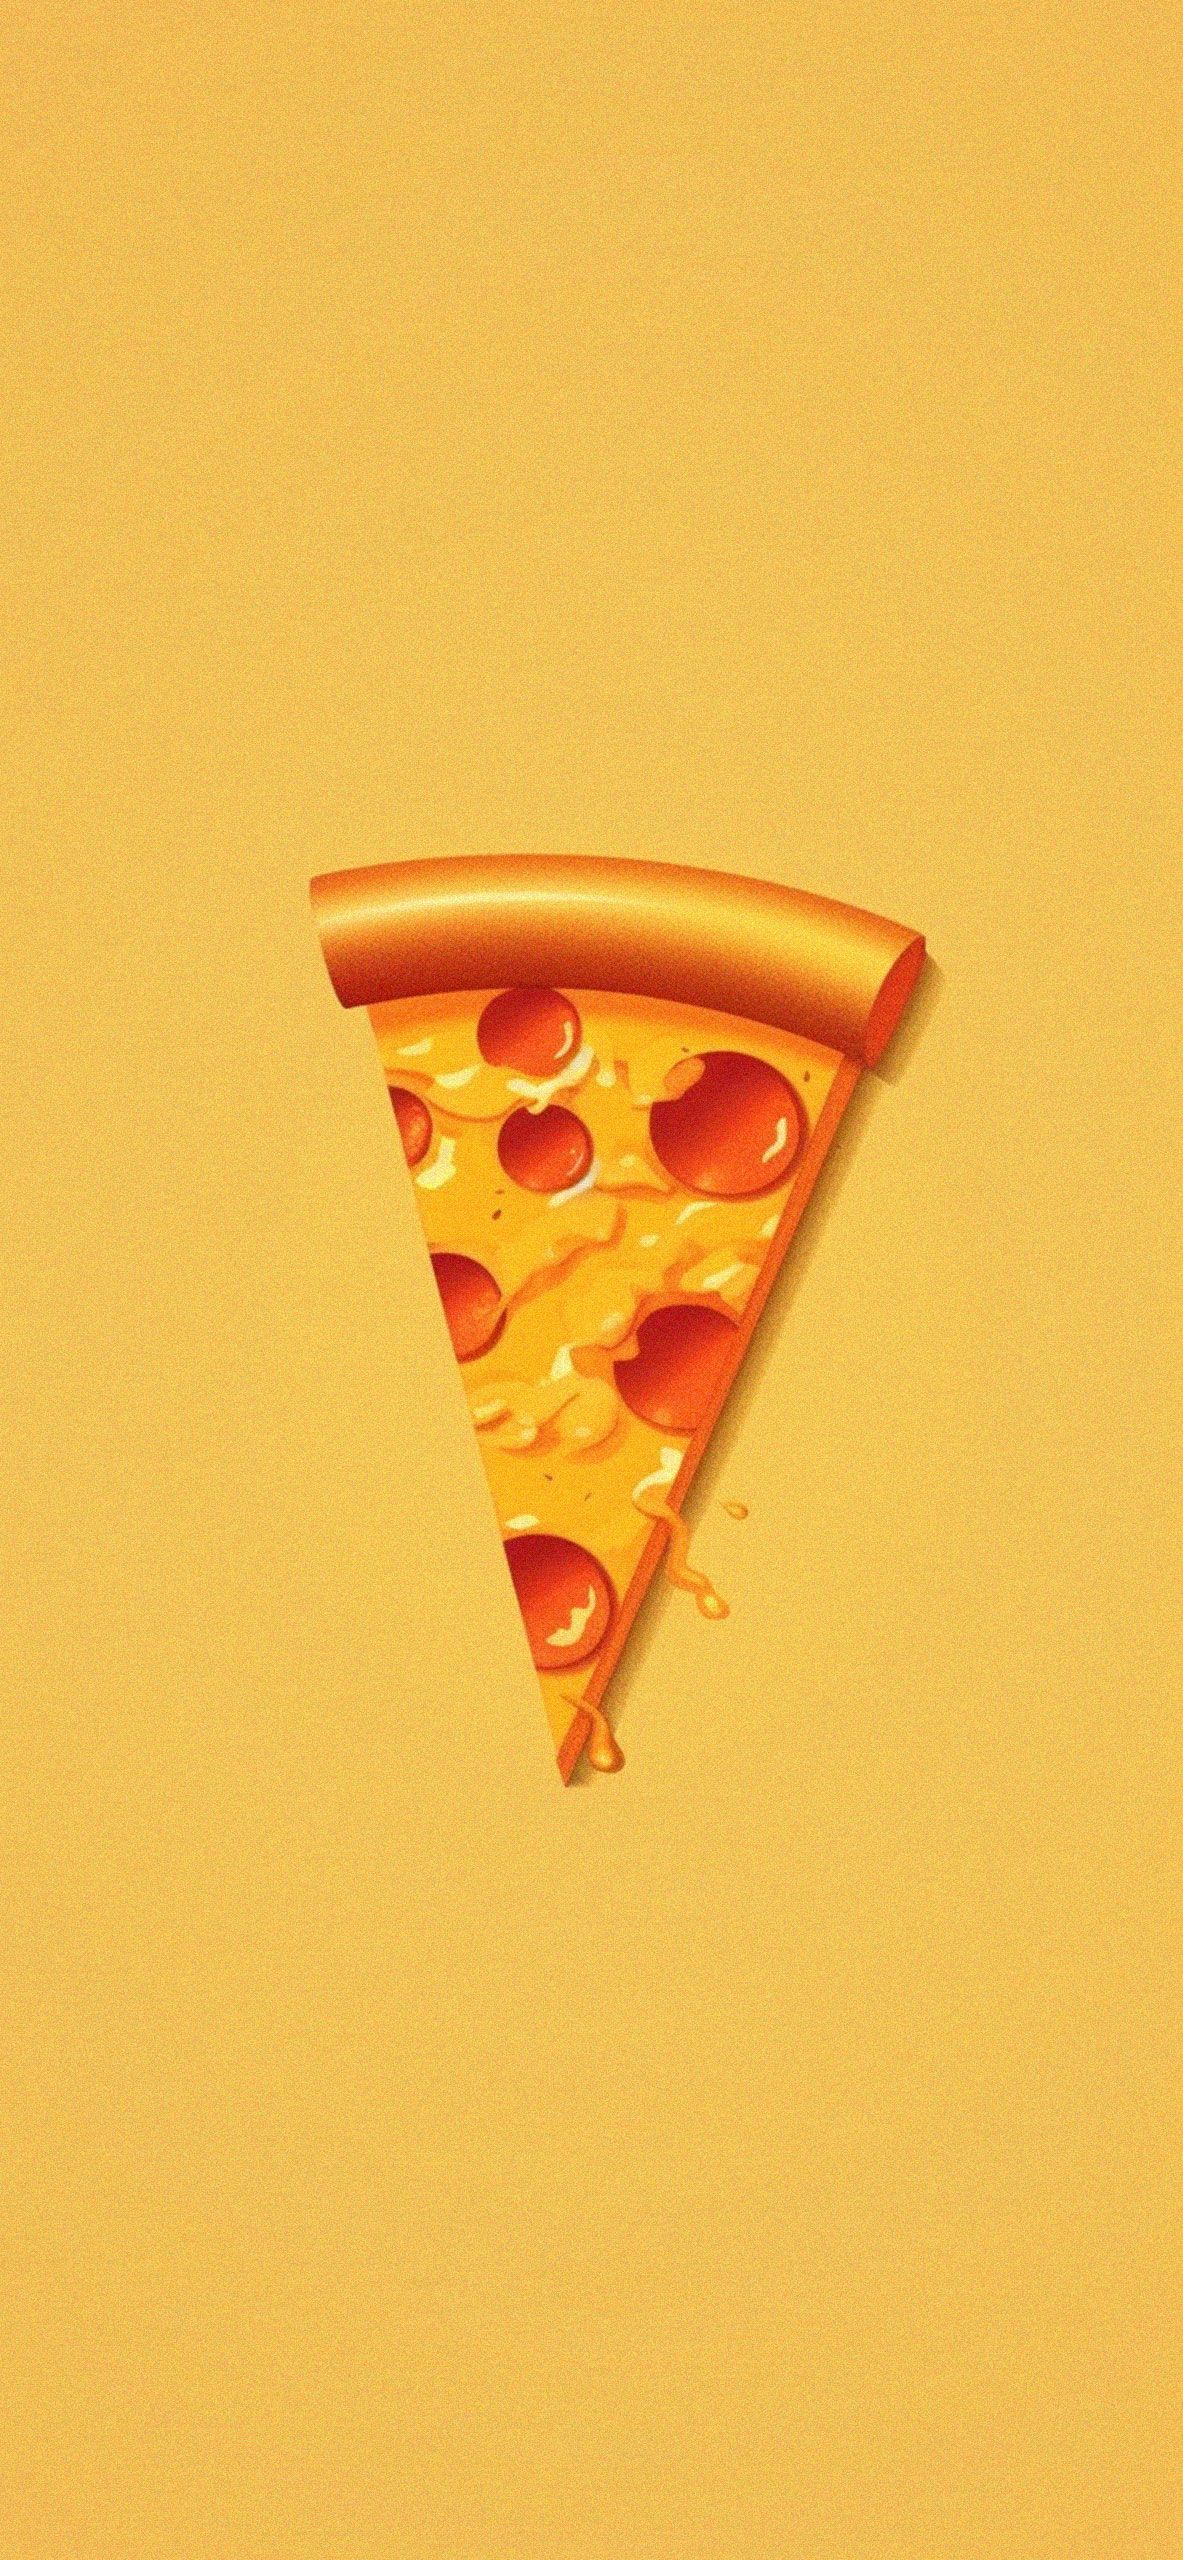 Slice of Pizza Yellow Wallpaper Wallpaper for iPhone 4k